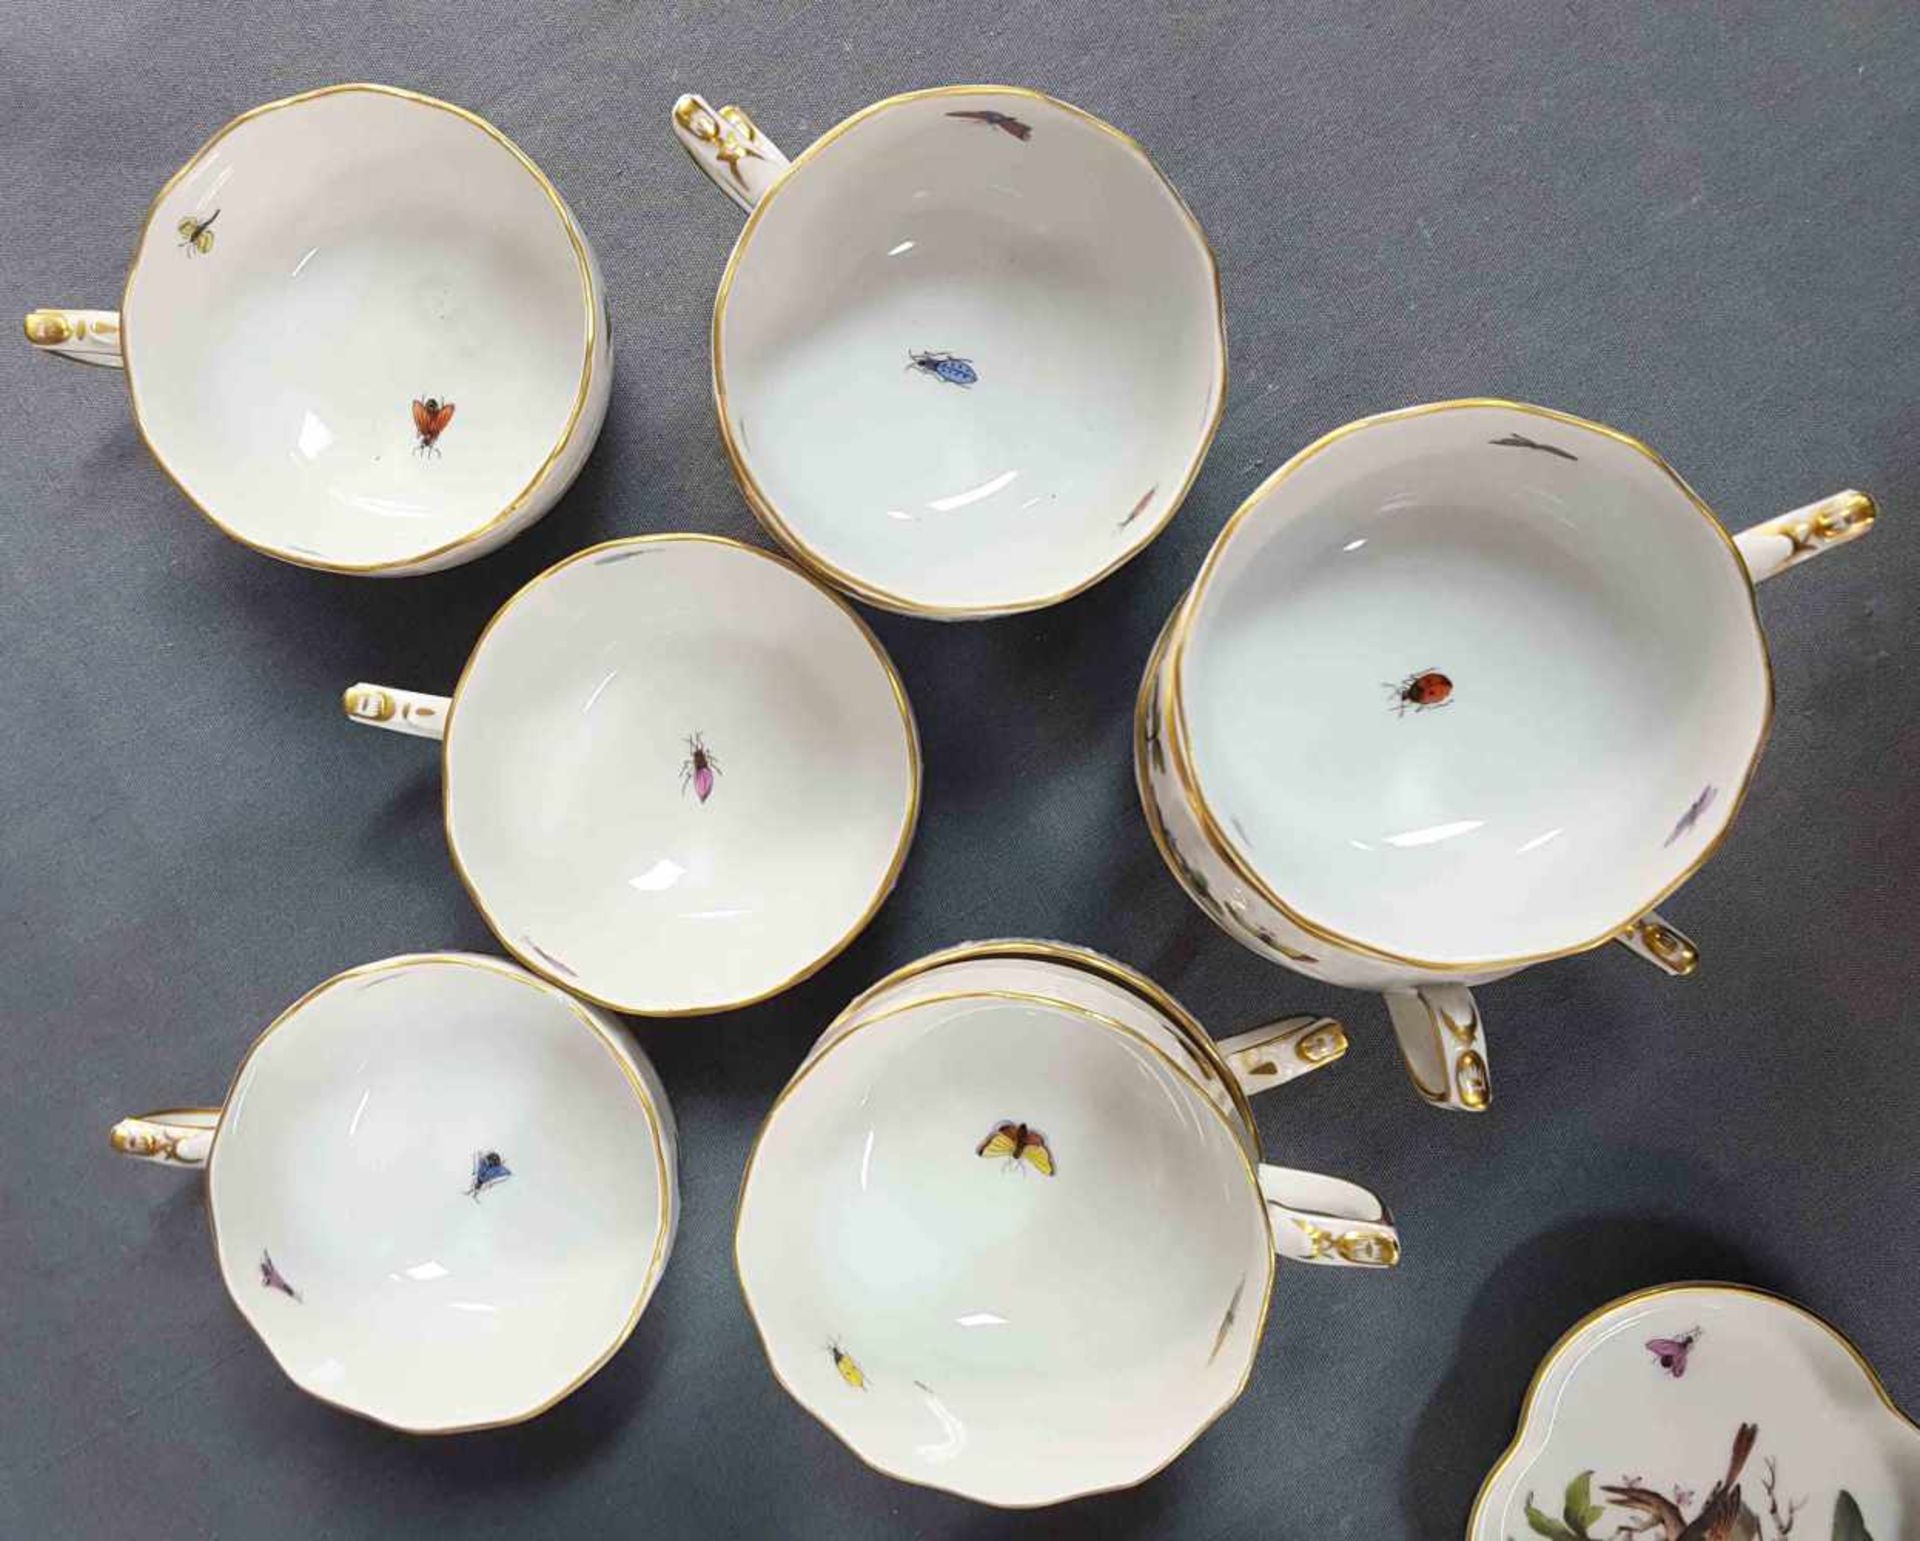 Herend Porcelain. Coffee service for at least 9 people. - Image 5 of 9